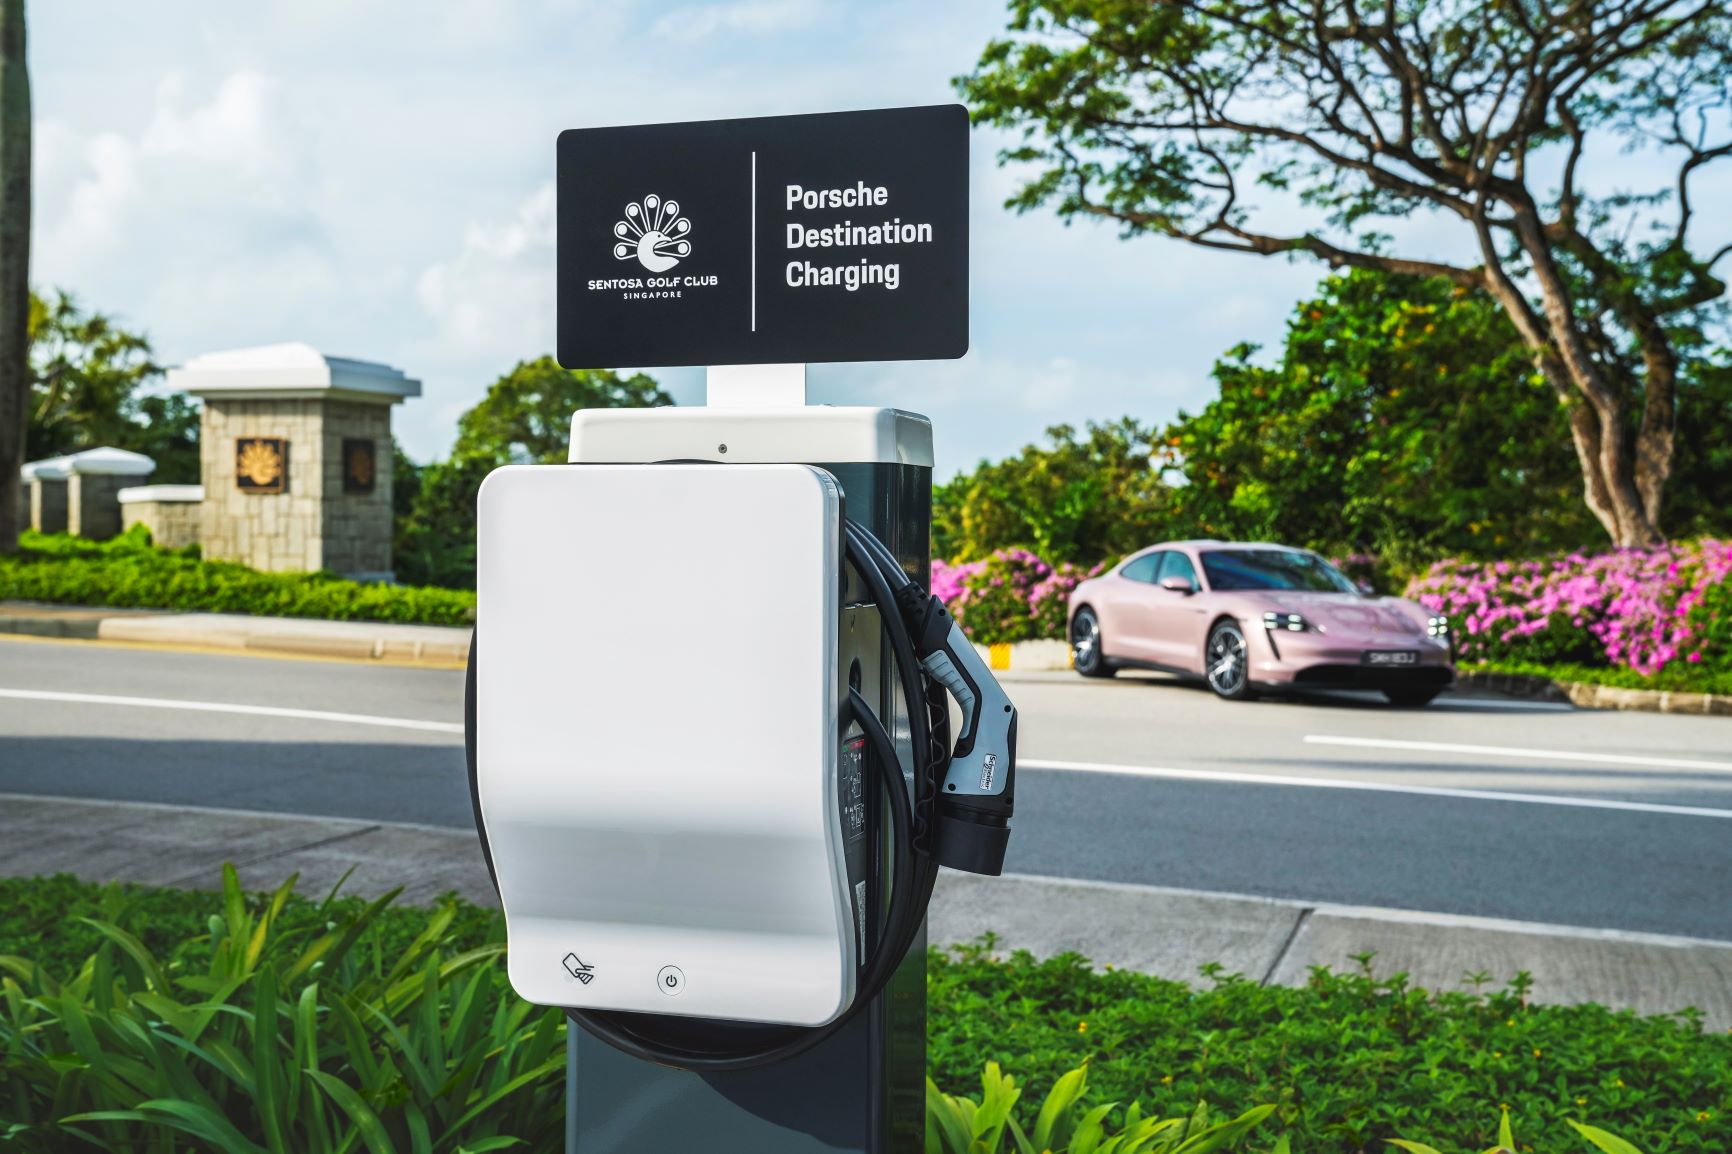 Sentosa Golf Club has become the first golf club in Singapore and Southeast Asia to install electric vehicle charging stations